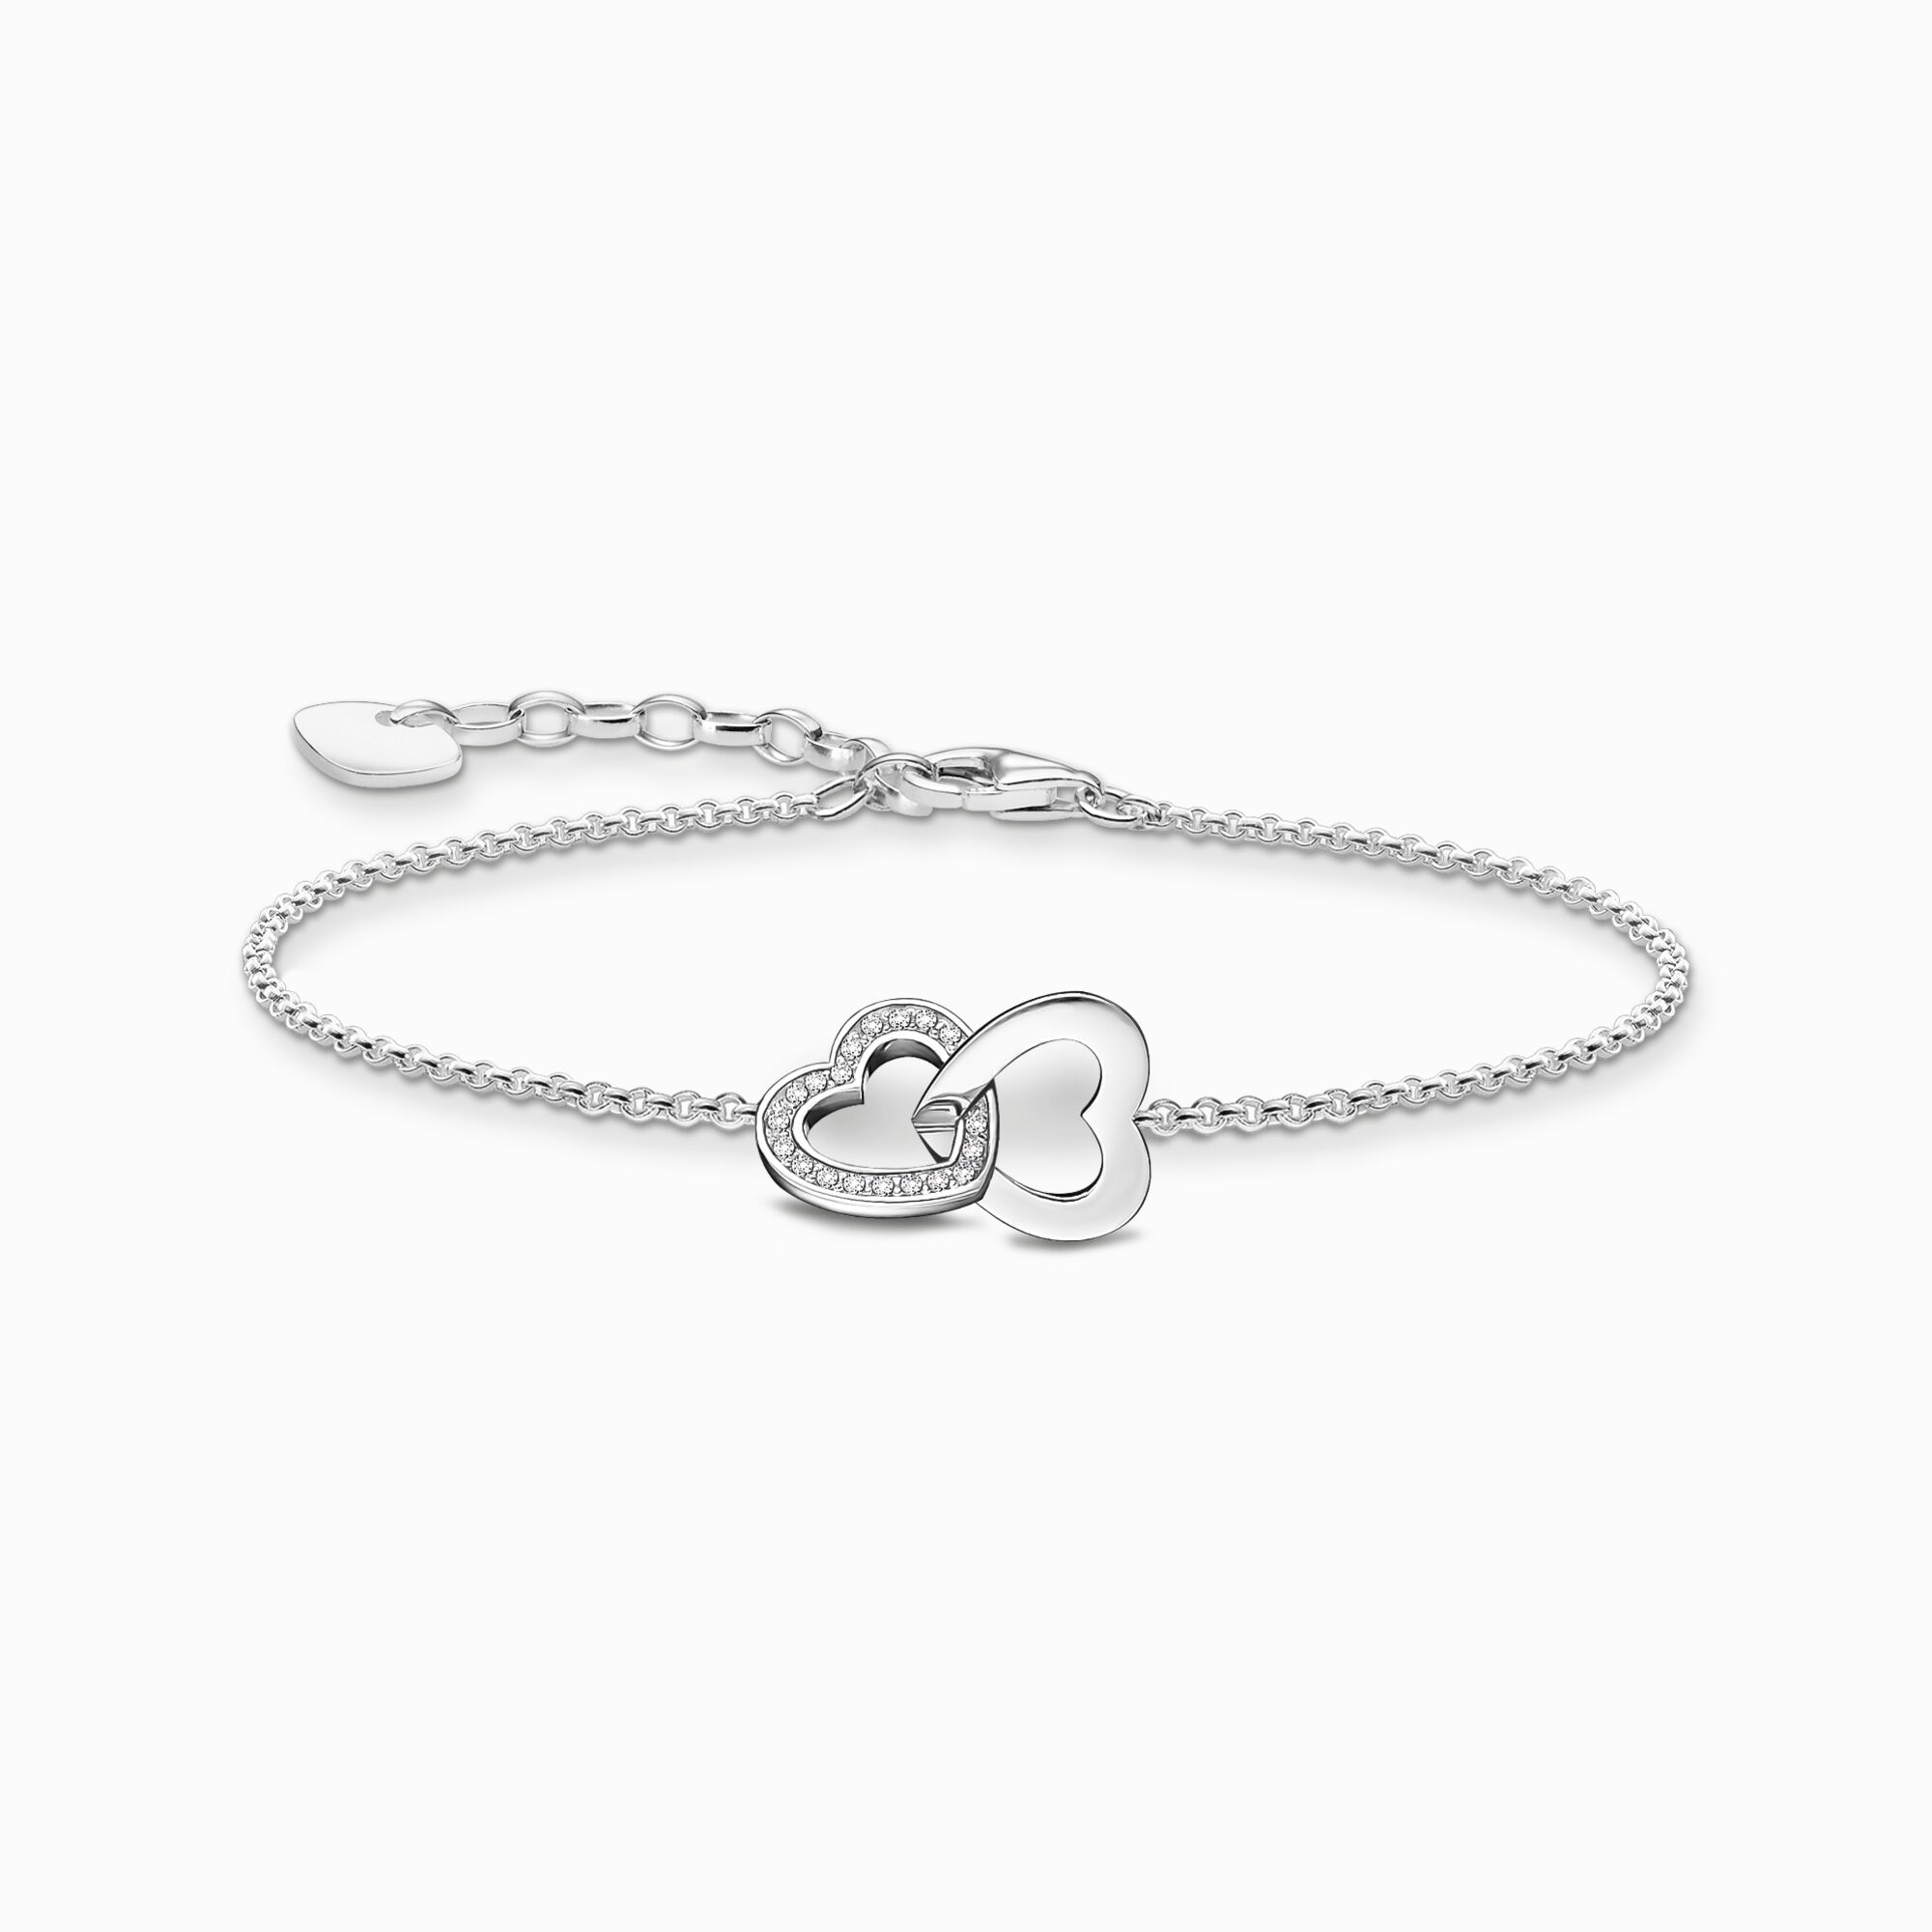 Silver bracelet with intertwined hearts pendant from the Charming Collection collection in the THOMAS SABO online store